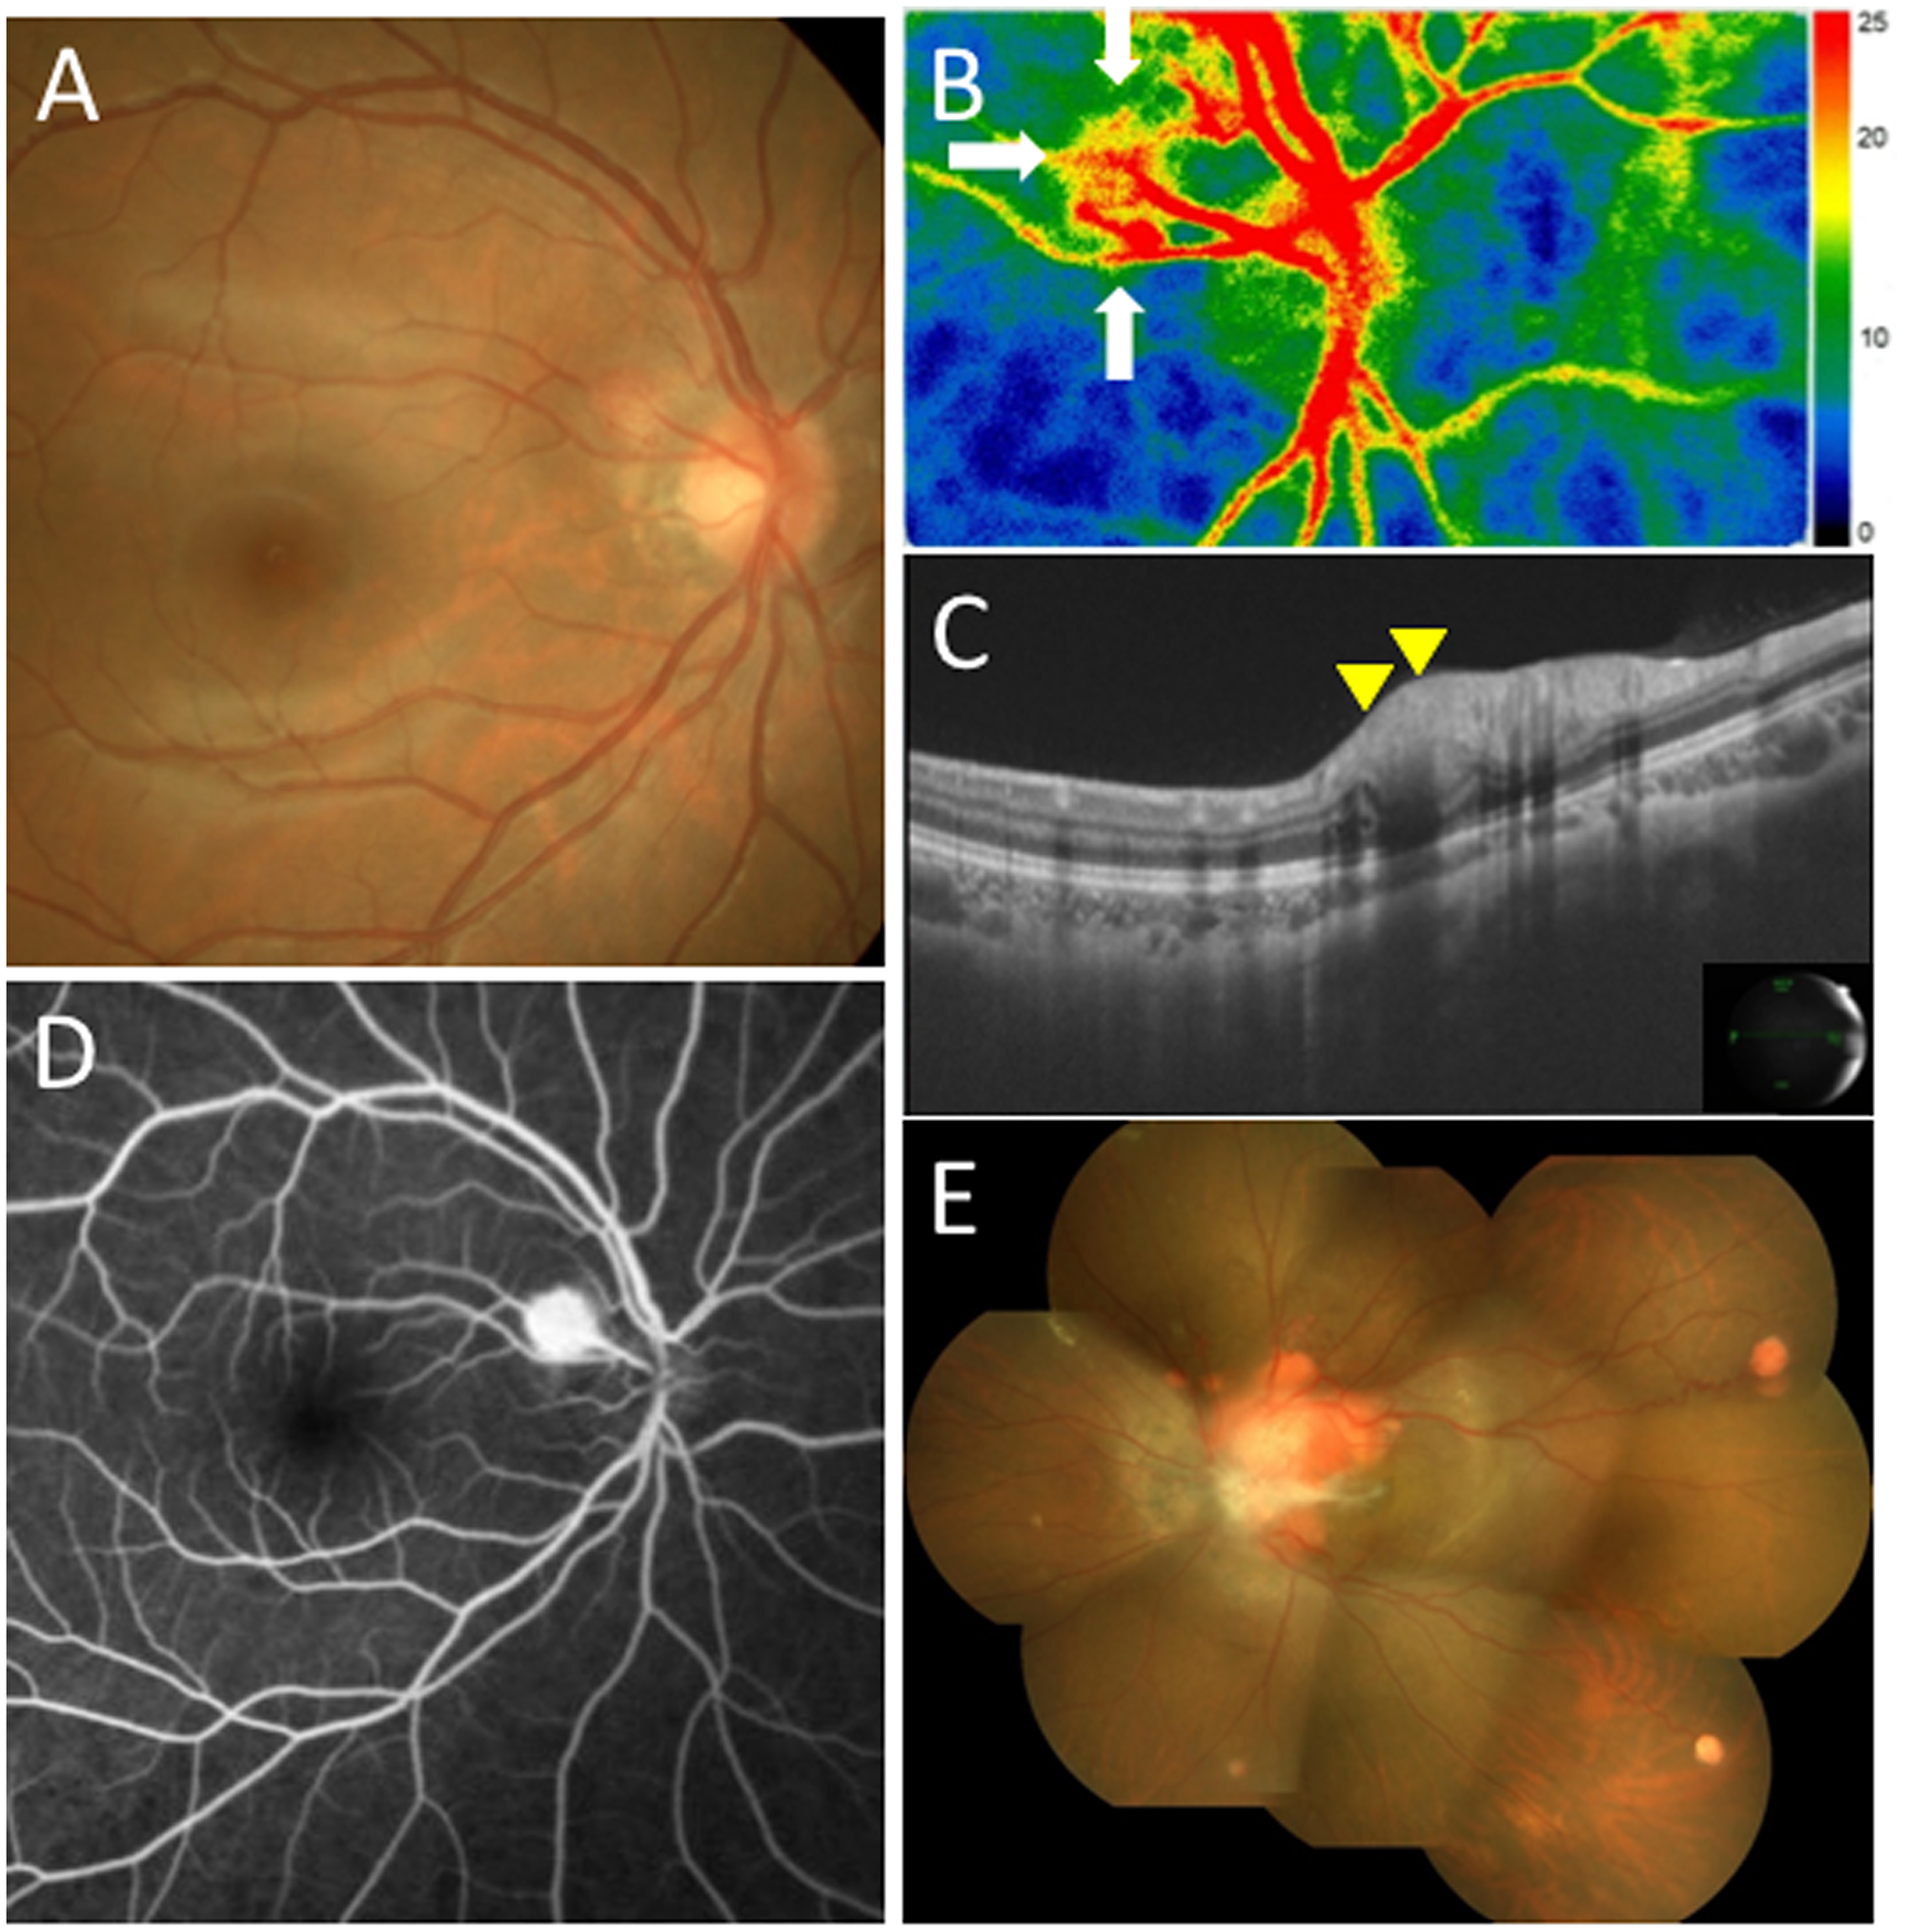 Initial findings on color fundus photography (CFP), swept-source optical coherence tomography (SS-OCT), laser speckle flowgraphy (LSFG), and fluorescein angiography (FA) in the present case with juxtapapillary retinal capillary hemangioblastoma (JRCH).